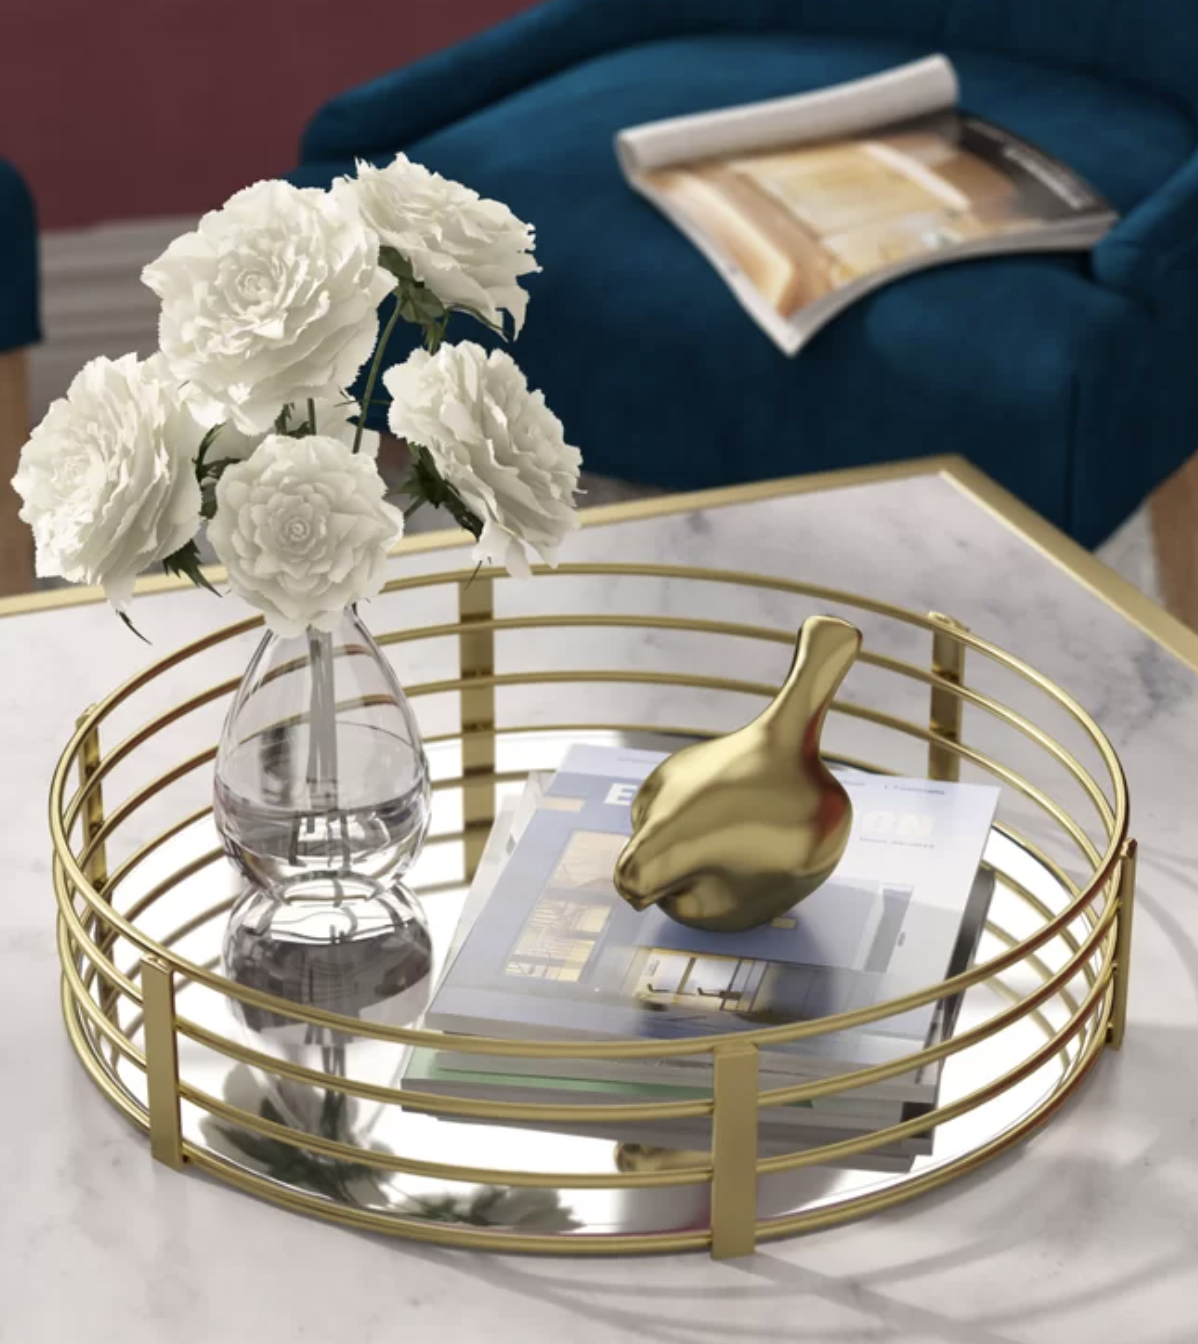 Decorative tray with a gold-tone figurine, white roses in a vase, and magazines on a table